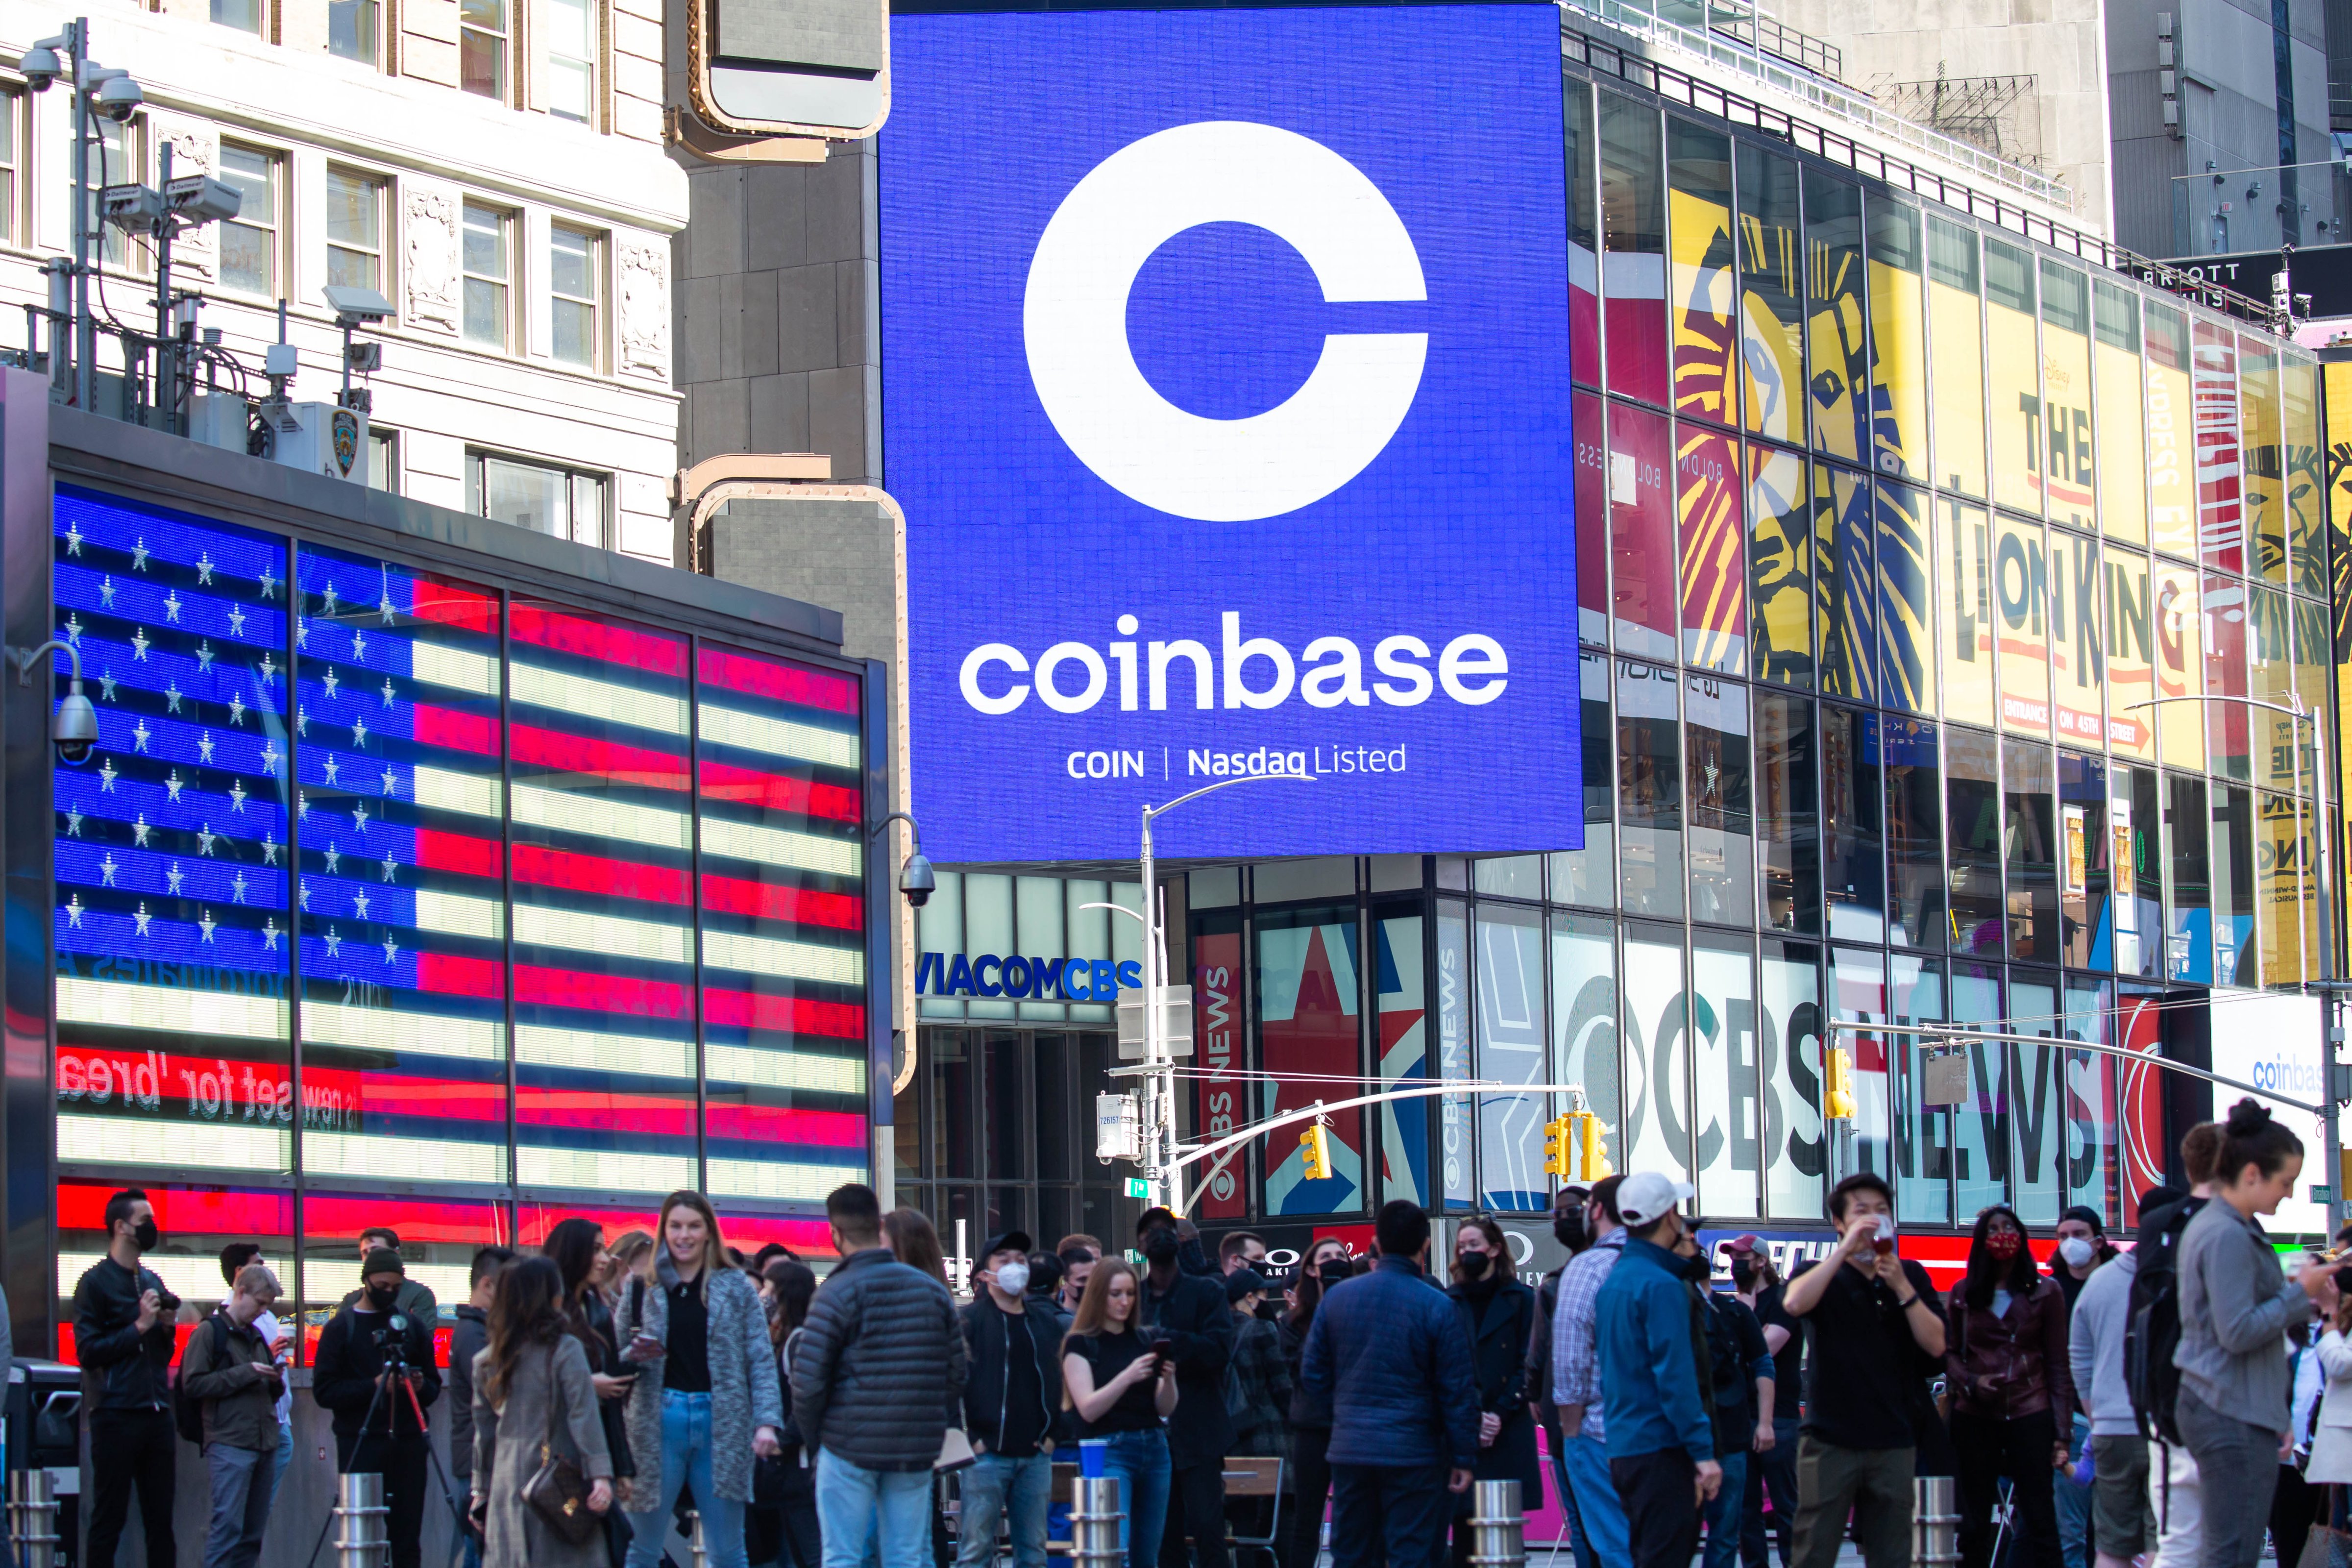 Monitors display Coinbase signage during the company's initial public offering (IPO) at the Nasdaq MarketSite in New York, on April 14, 2021. (Michael Nagle—Bloomberg/Getty Images)